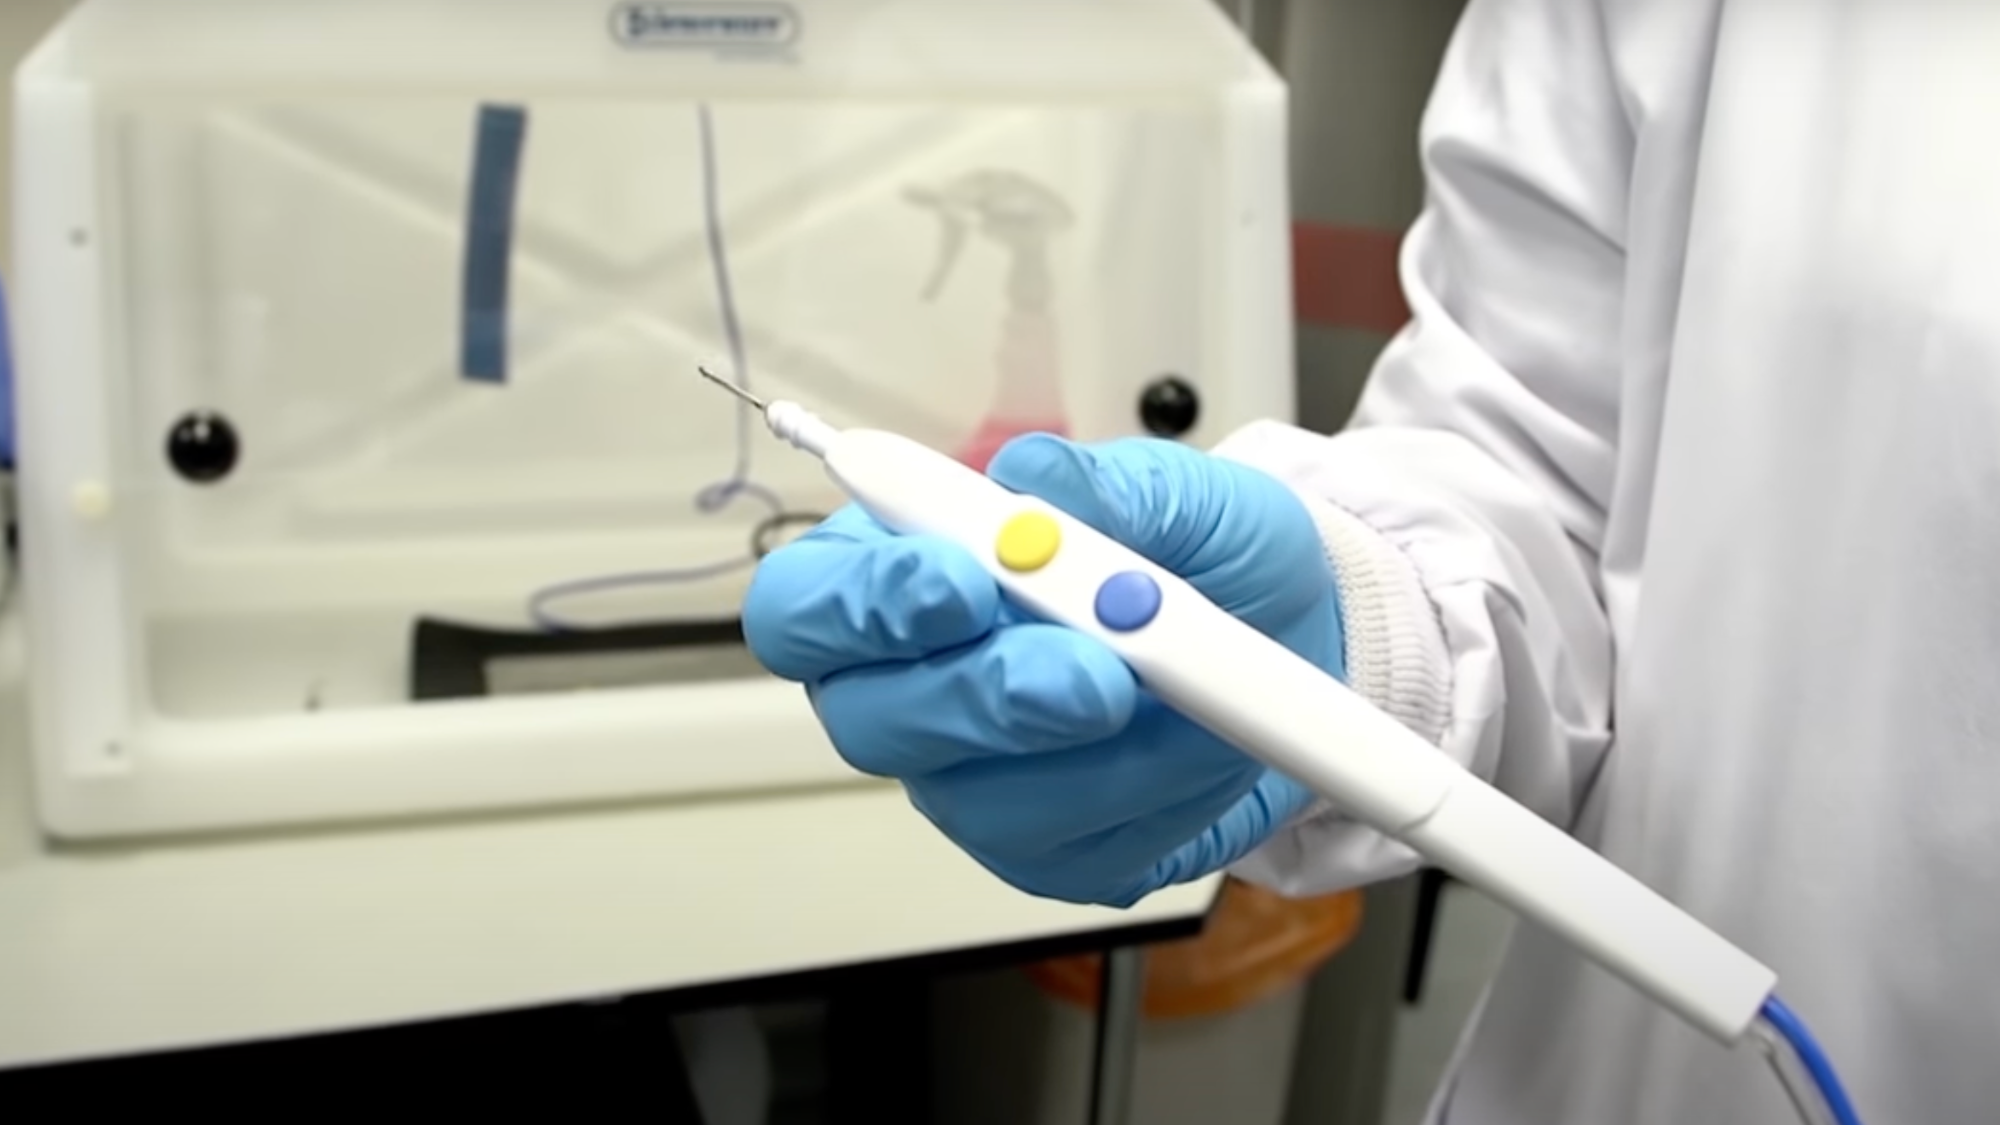 This surgical smart knife can detect endometrial cancer cells in seconds